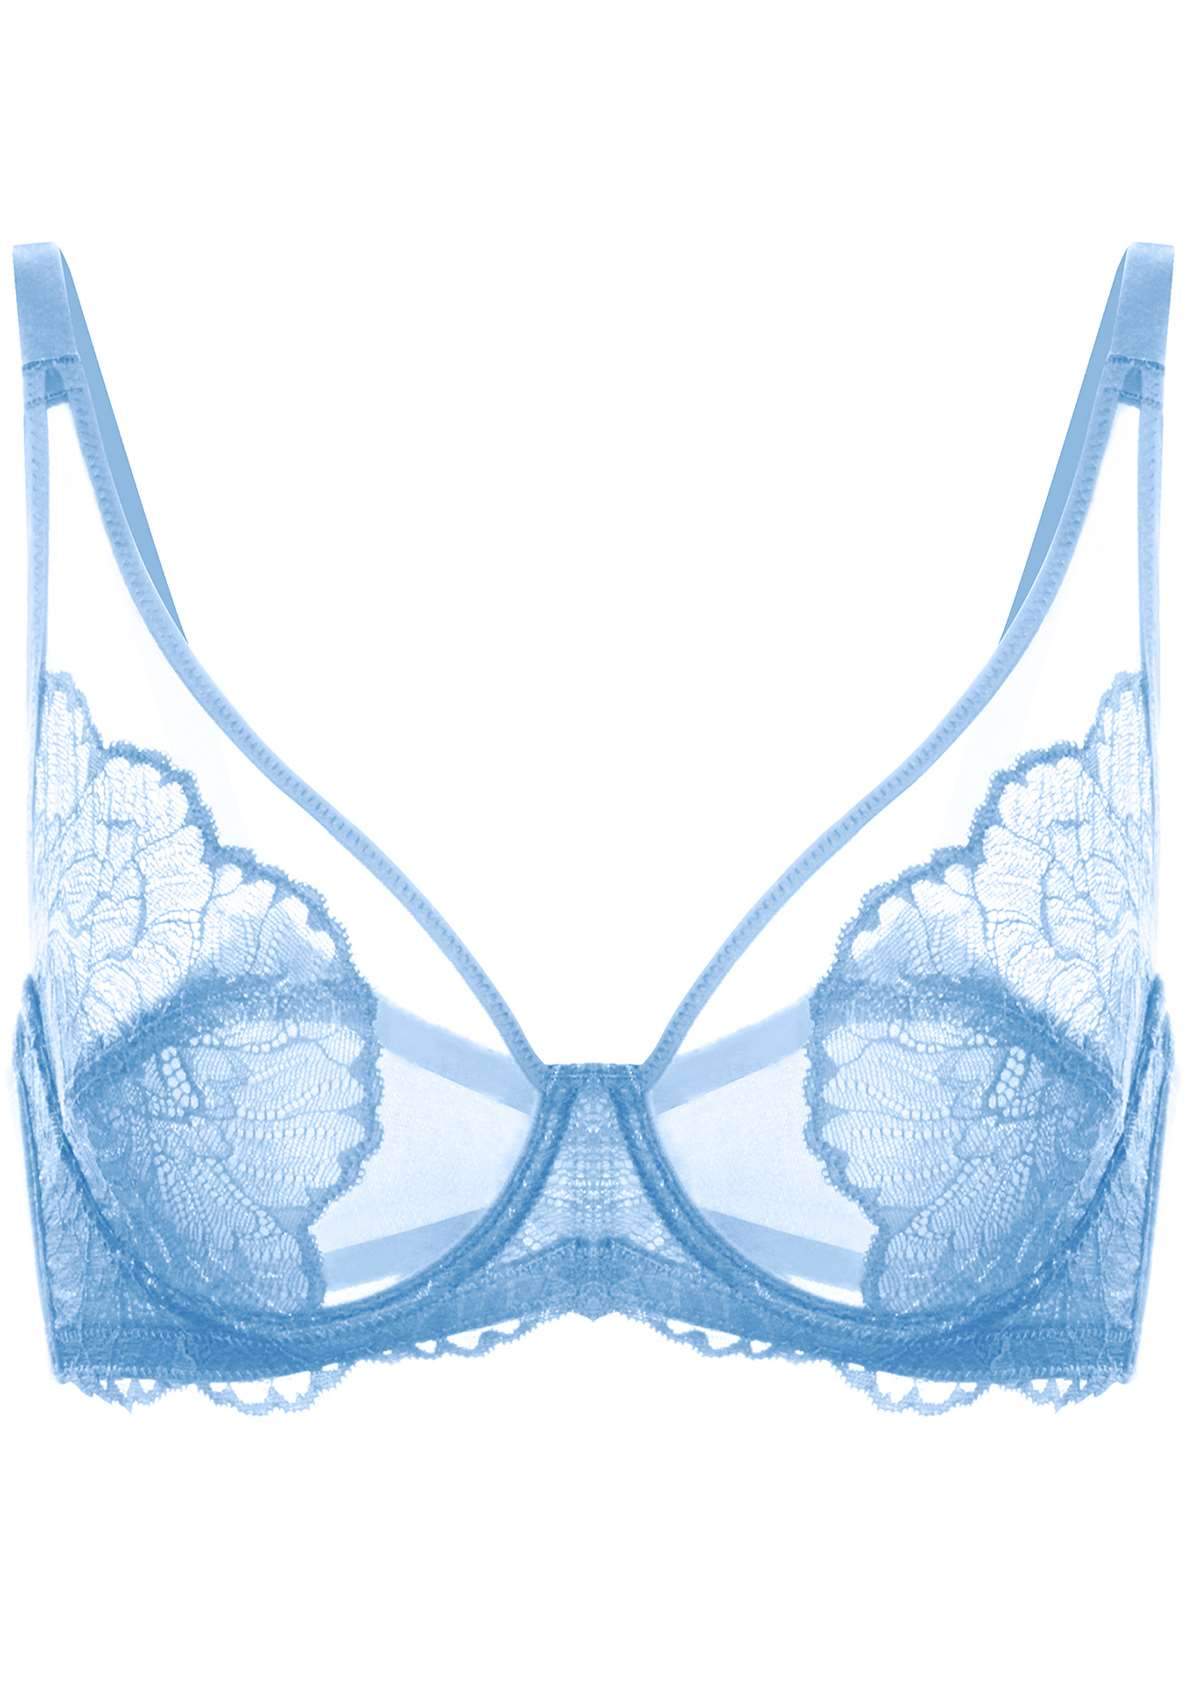 HSIA Blossom Full Coverage Supportive Unlined Underwire Bra Set - Storm Blue / 36 / C